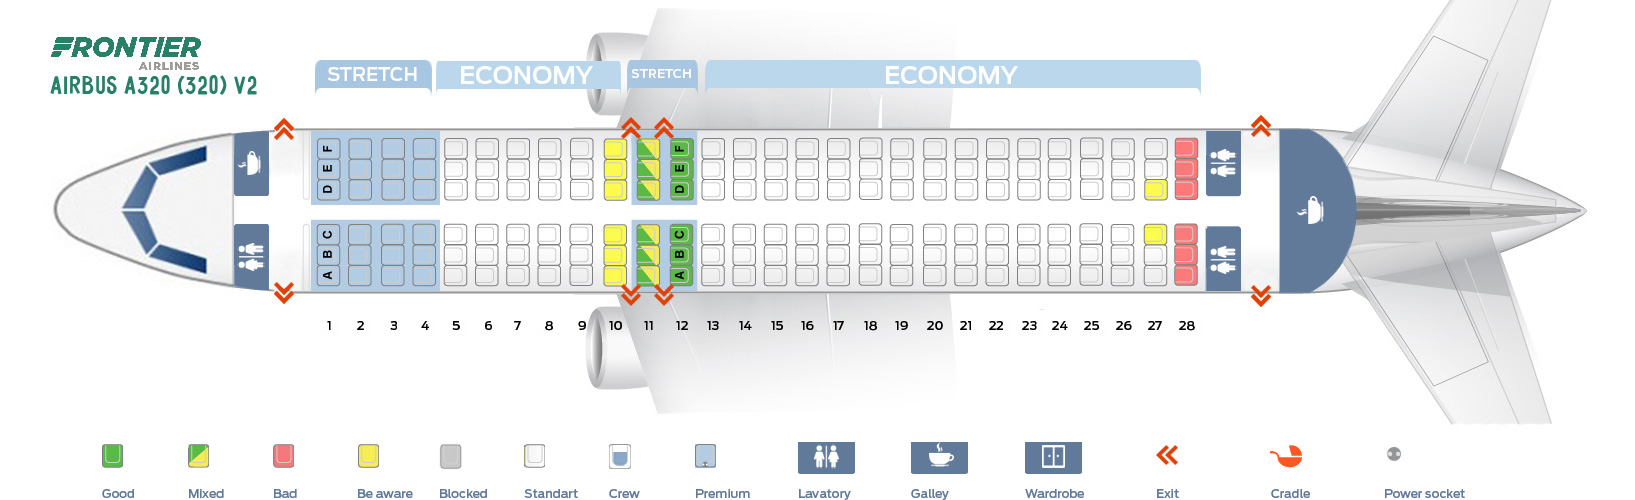 Frontier Plane Seating Chart